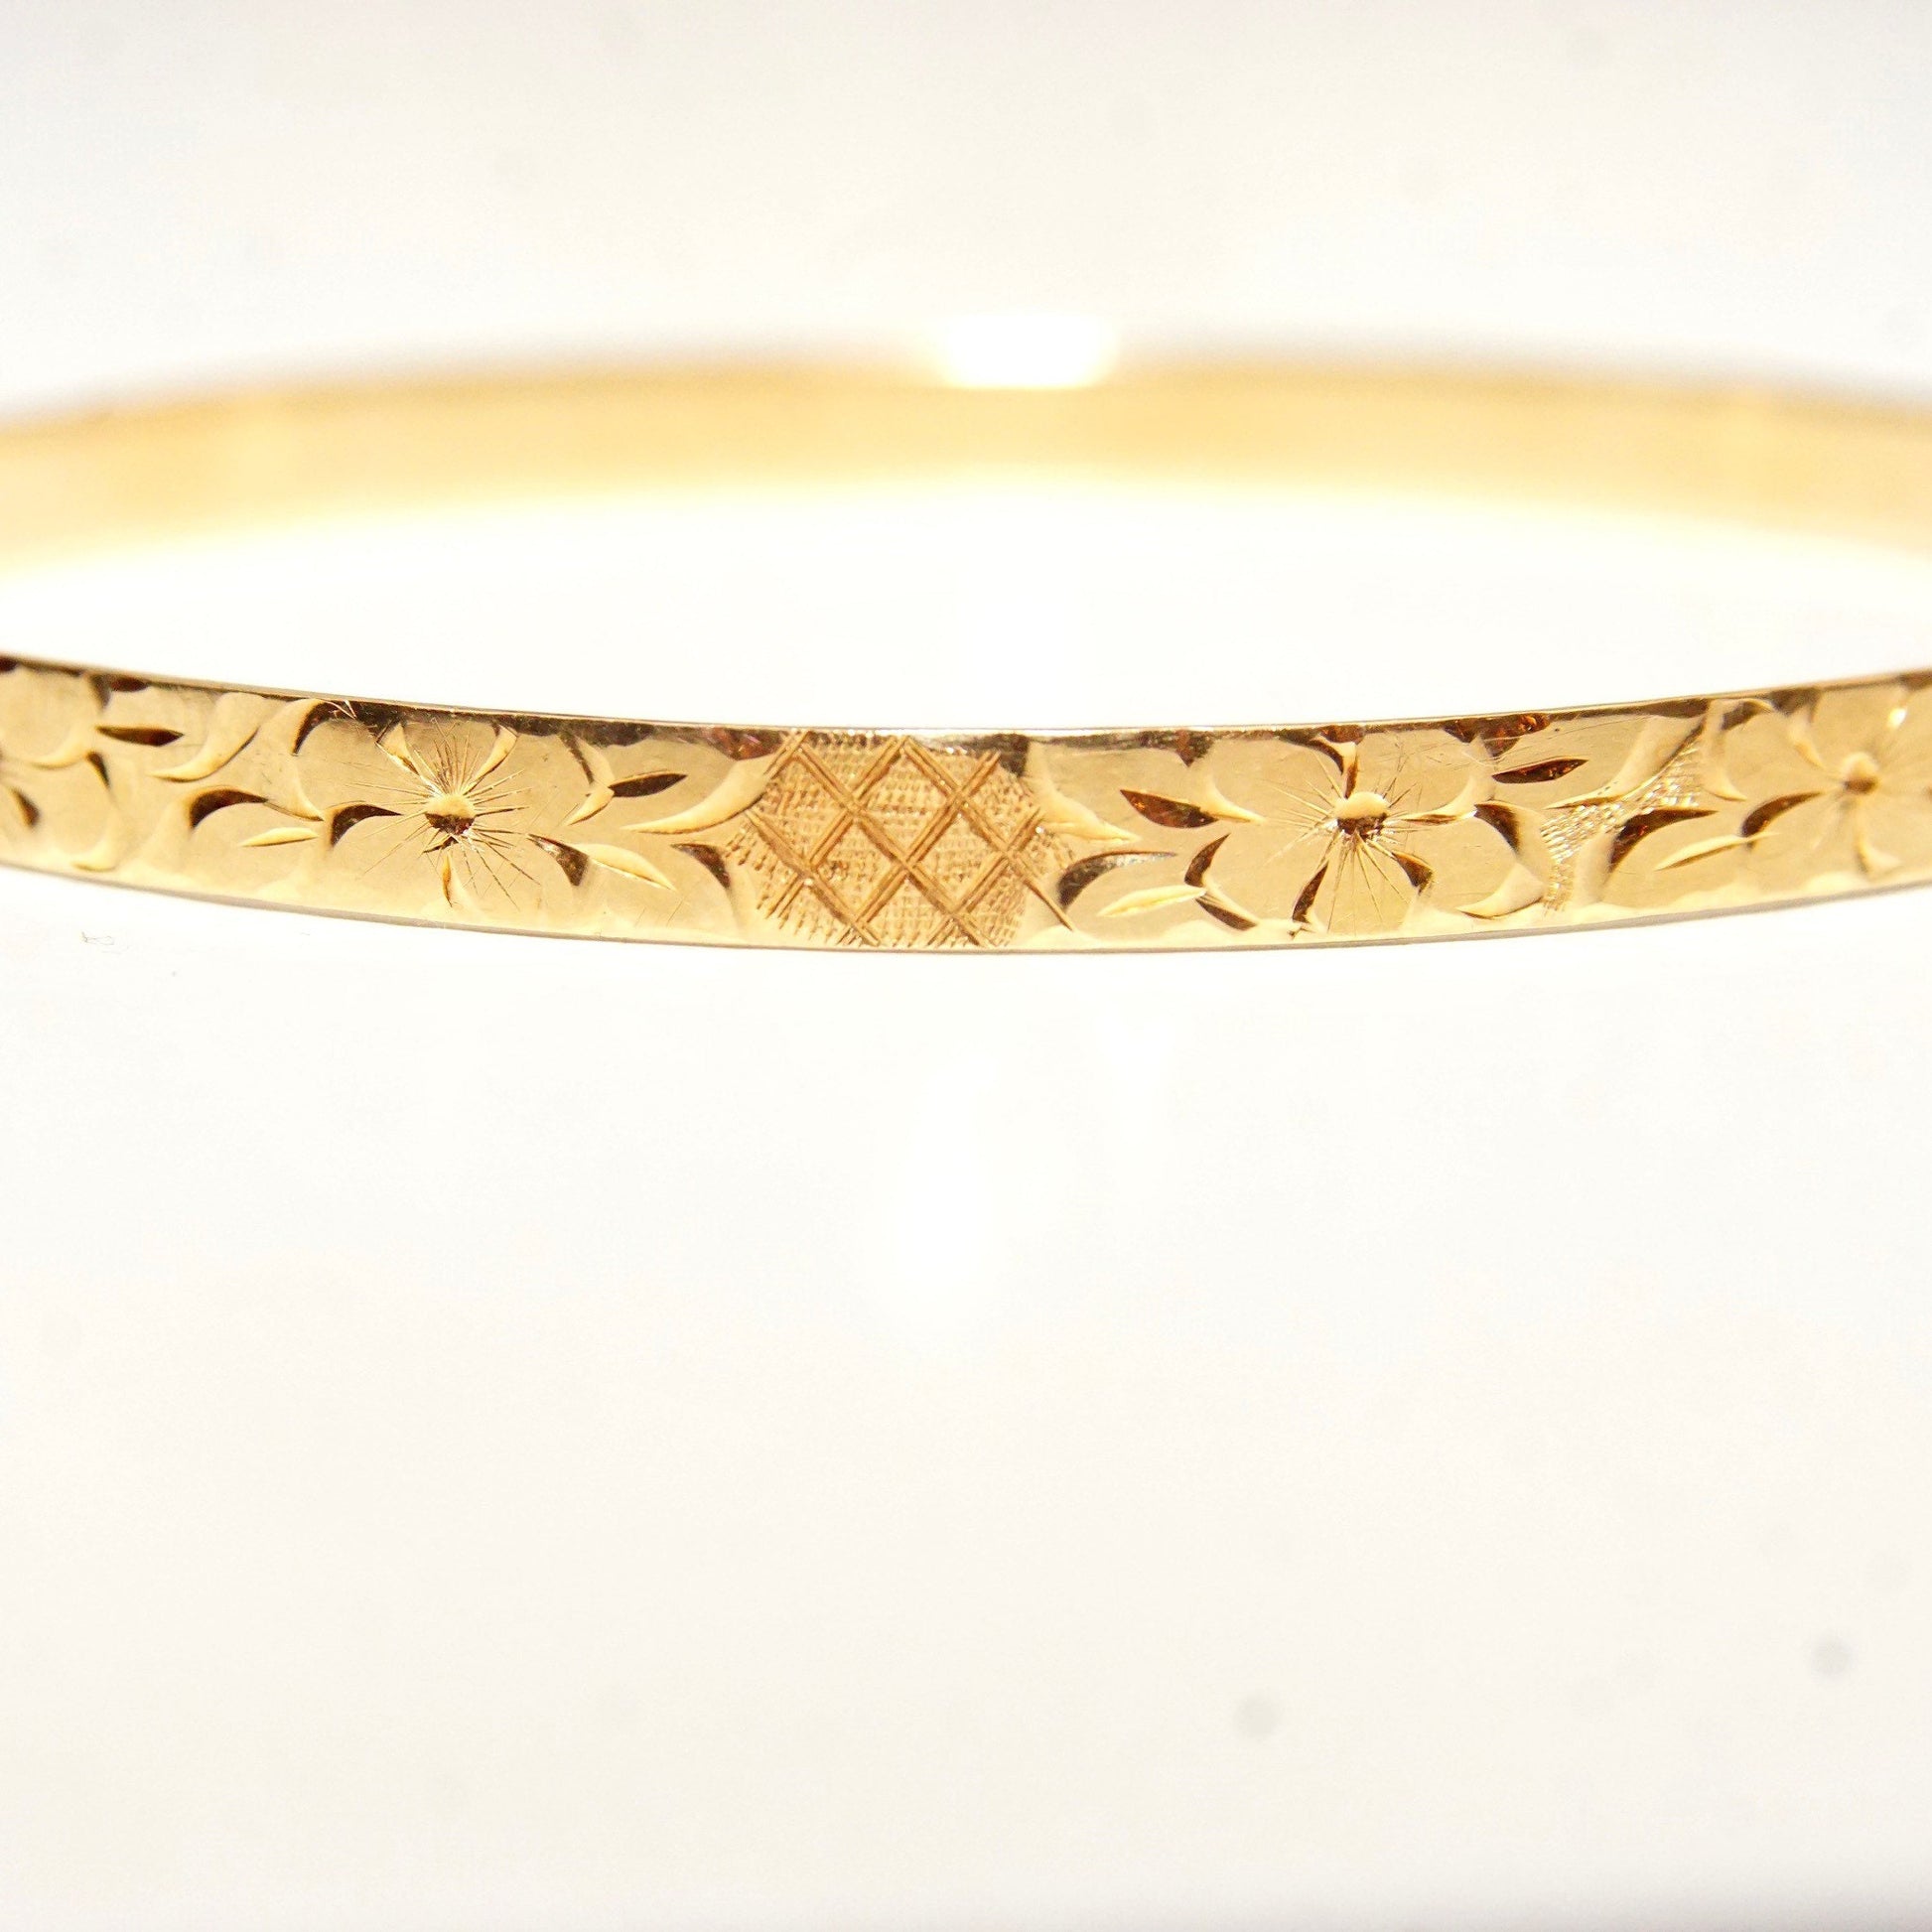 14K yellow gold bangle bracelet featuring intricate diamond-cut floral and leaf motifs, 5mm wide, perfect for stacking or wearing solo.